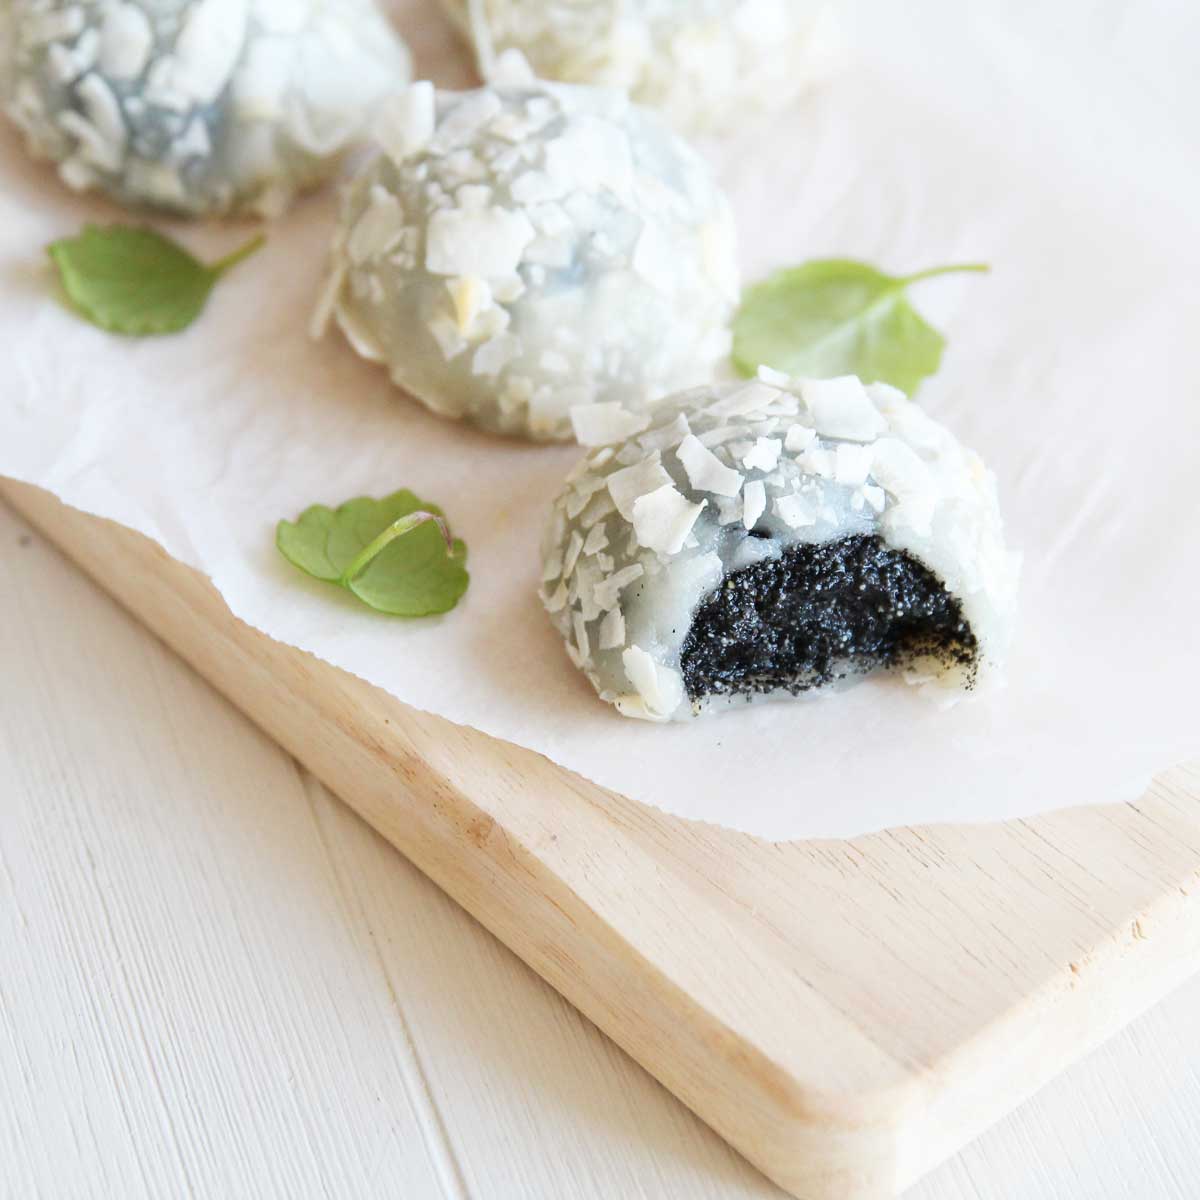 Easy Microwave Coconut Mochi with Black Sesame Filling - Roasted Corn Naan